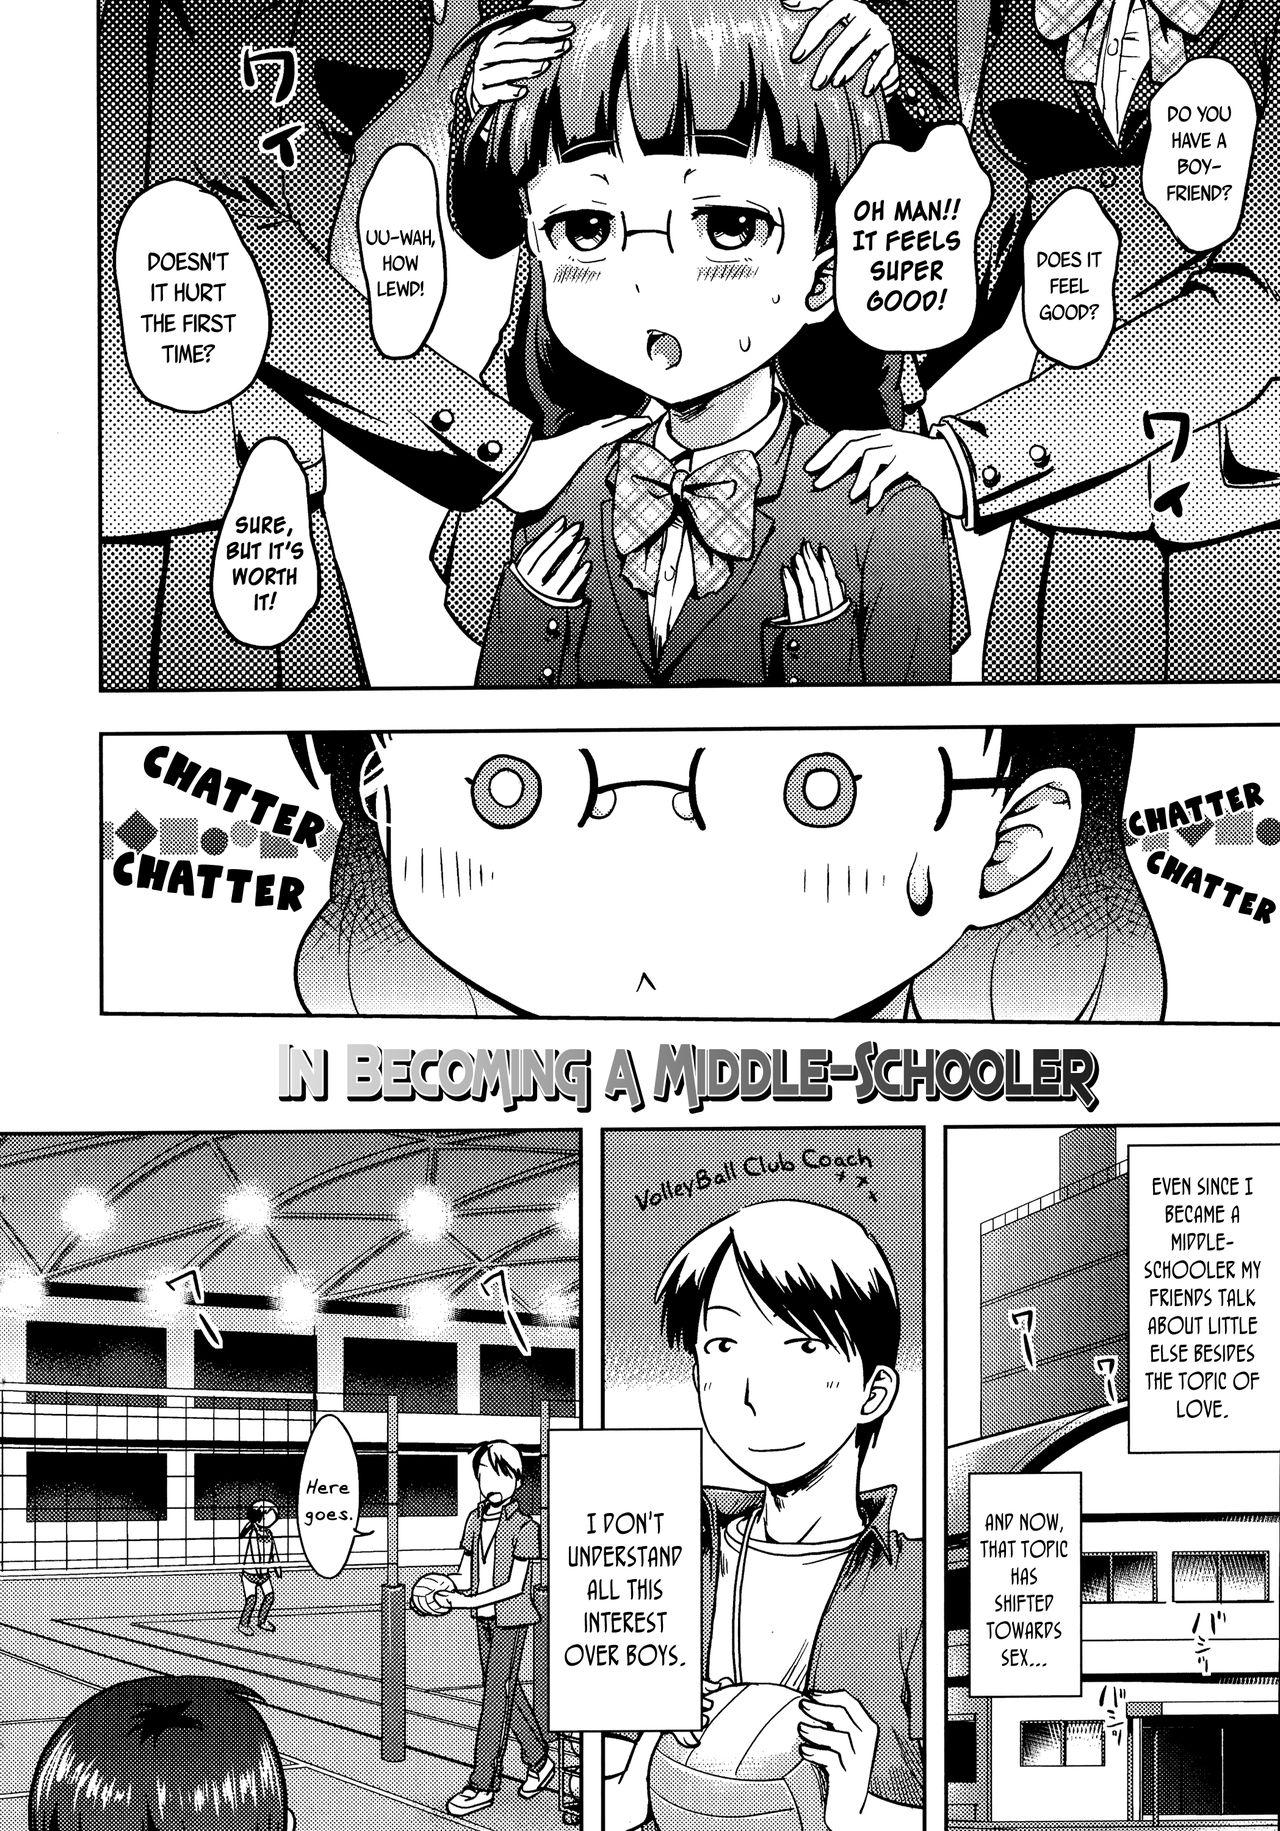 Party Chuugakusei Ni Nattara | In Becoming a Middle-Schooler Tranny Sex - Page 2